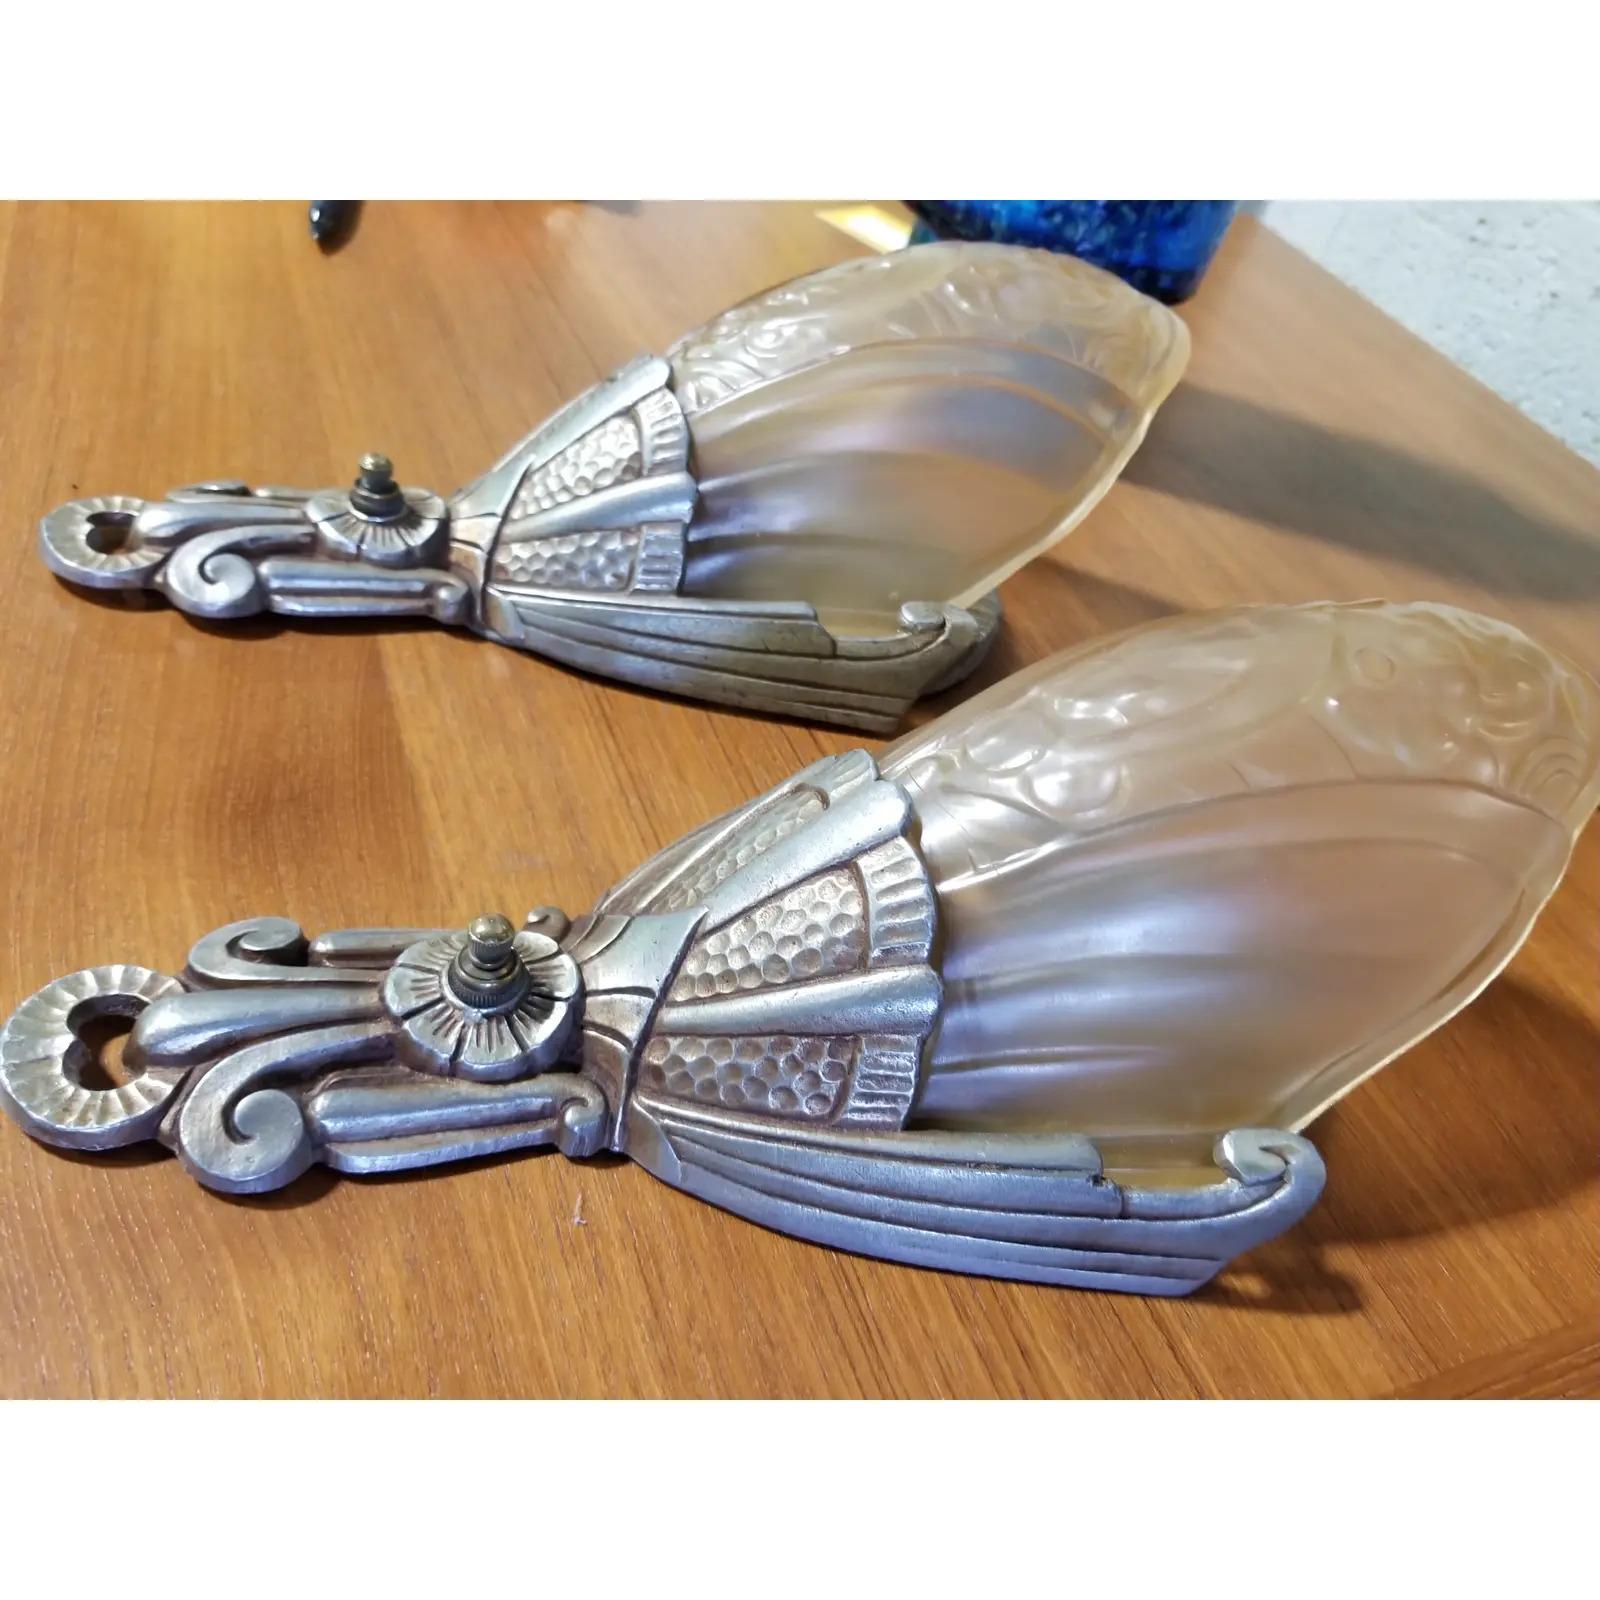 A pair of 1930s Art Deco wall sconces by Lincoln Lighting Company. Cast aluminum back plates with satin glass pressed glass shades. Original working condition. Each light has on/of switch. Excellent original condition.